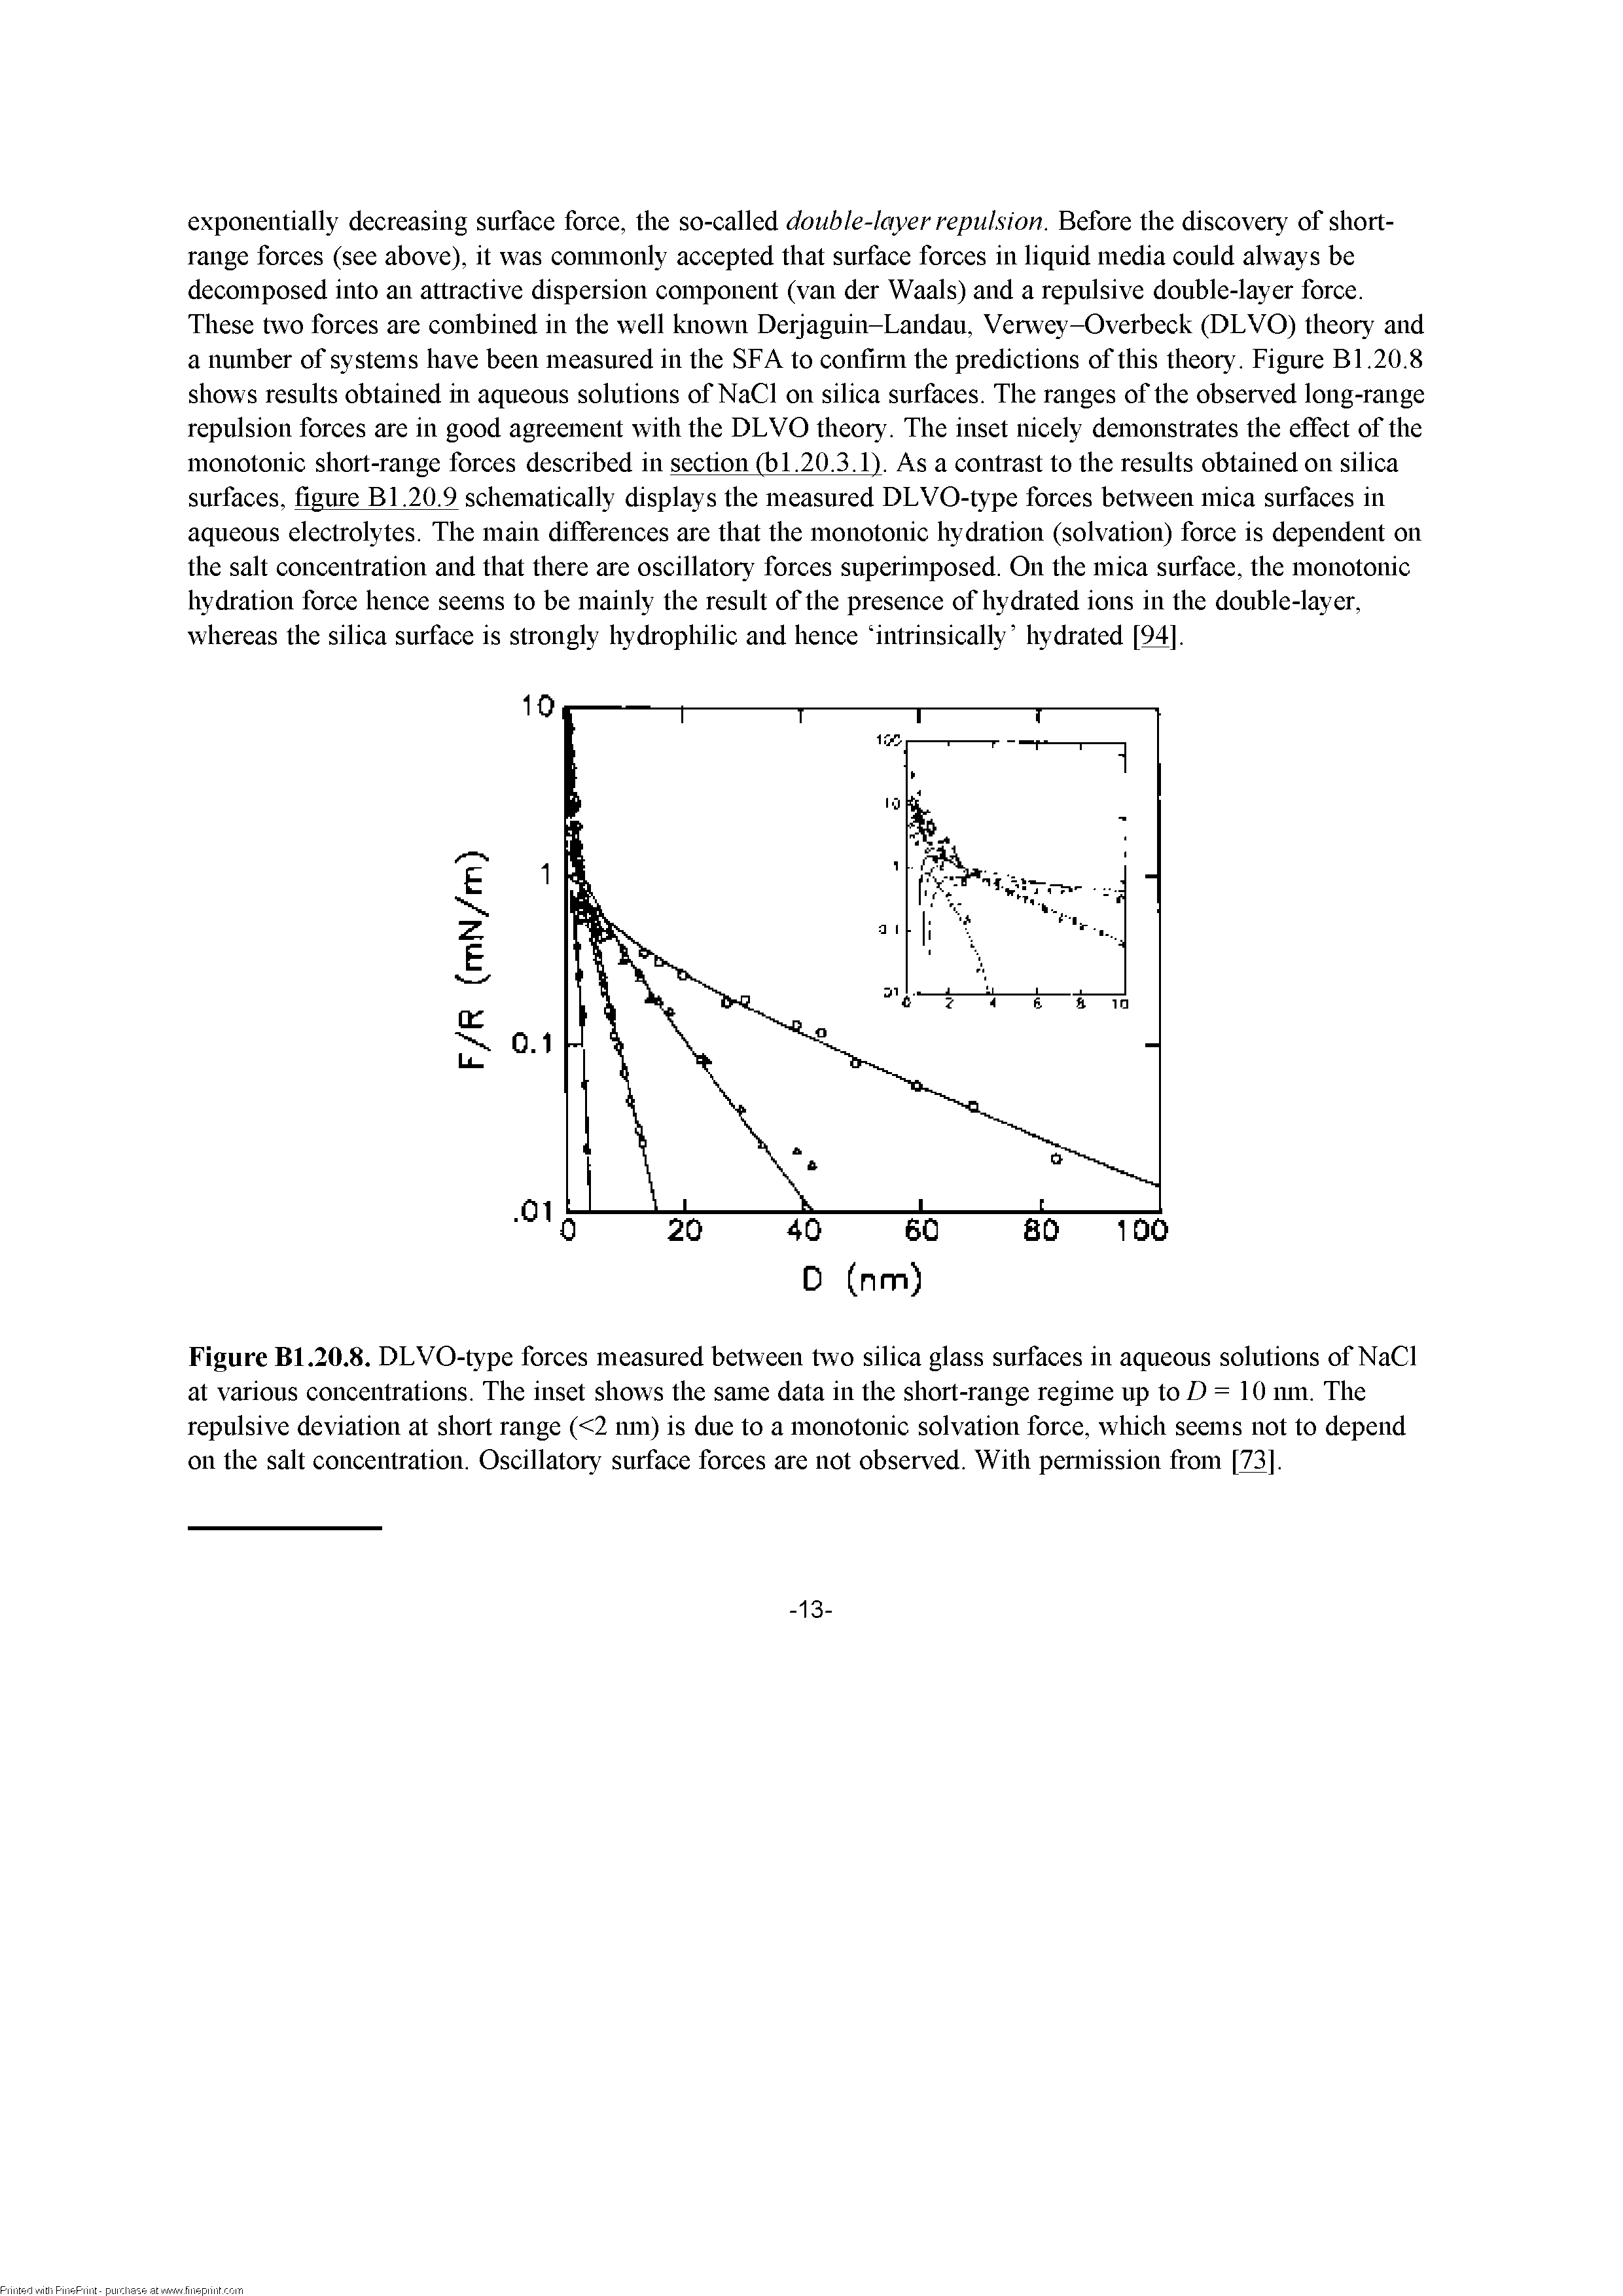 Figure Bl.20.8. DLVO-type forces measured between two silica glass surfaces in aqueous solutions of NaCl at various concentrations. The inset shows the same data in the short-range regime up to D = 10 mn. The repulsive deviation at short range (<2 nm) is due to a monotonic solvation force, which seems not to depend on the salt concentration. Oscillatory surface forces are not observed. With pemiission from [73].